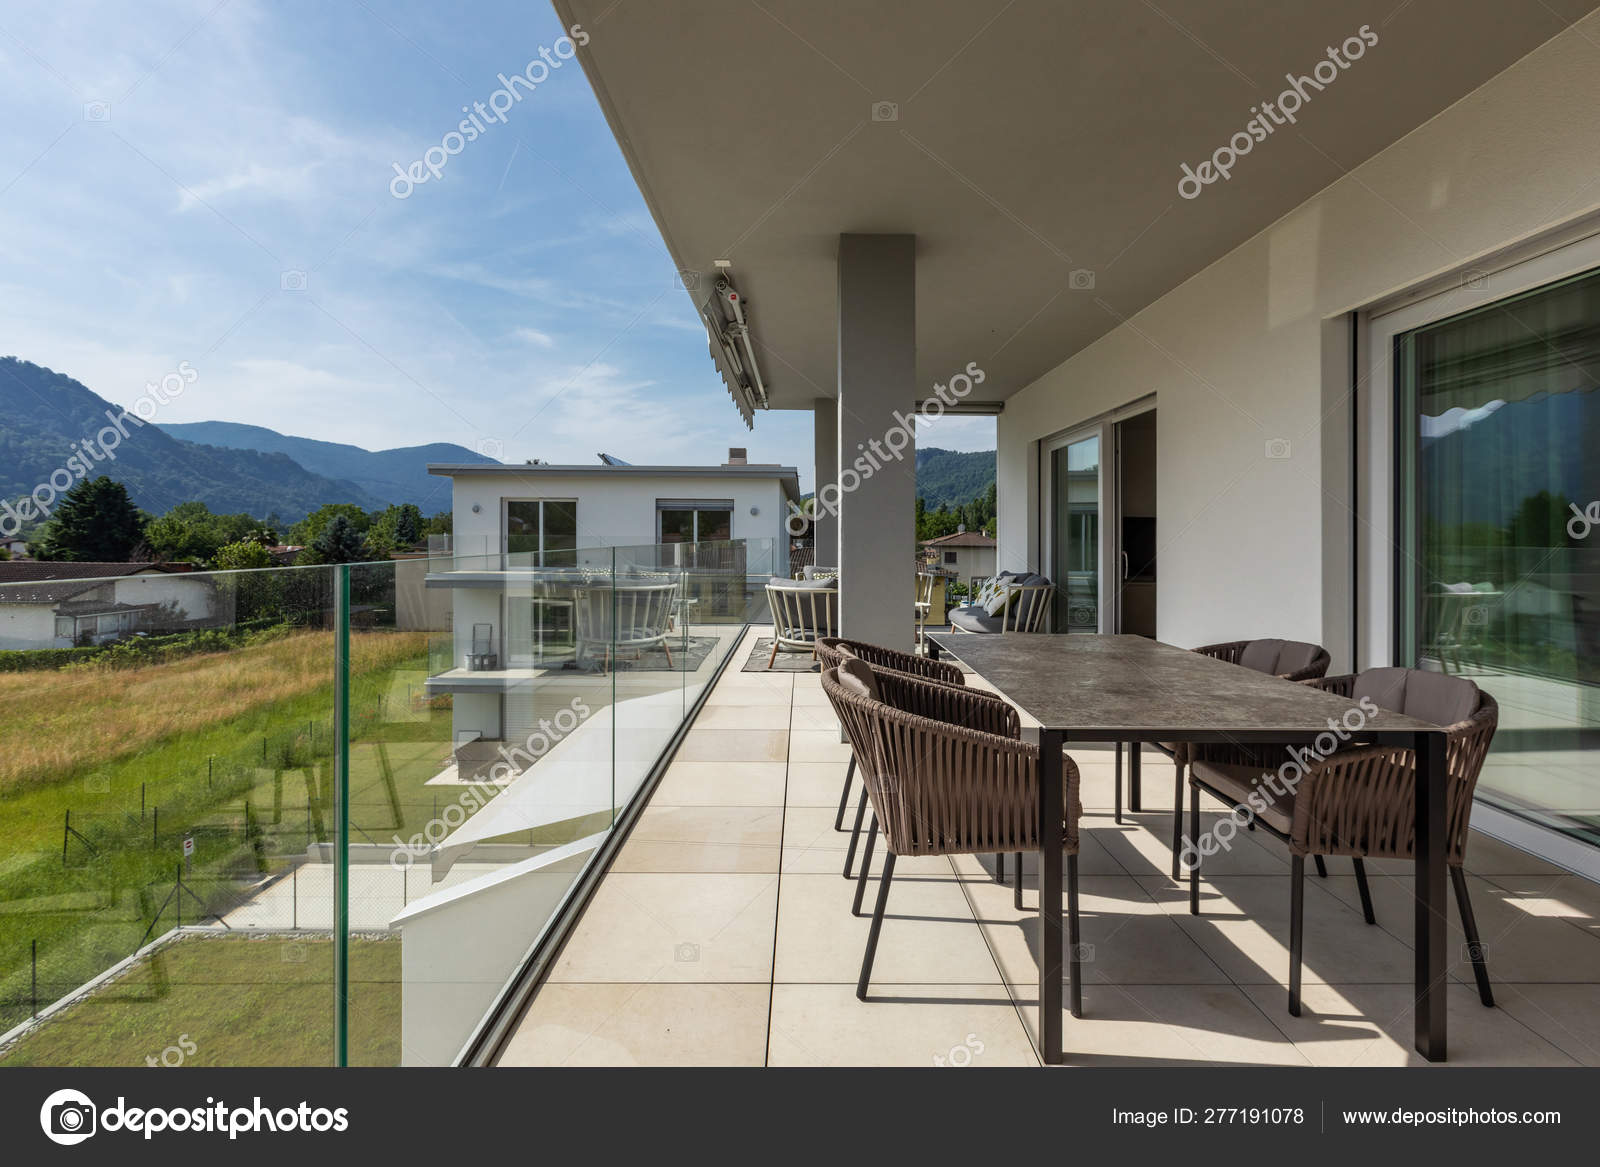 depositphotos_277191078-stock-photo-balcony-with-outdoor-furniture-in.jpg